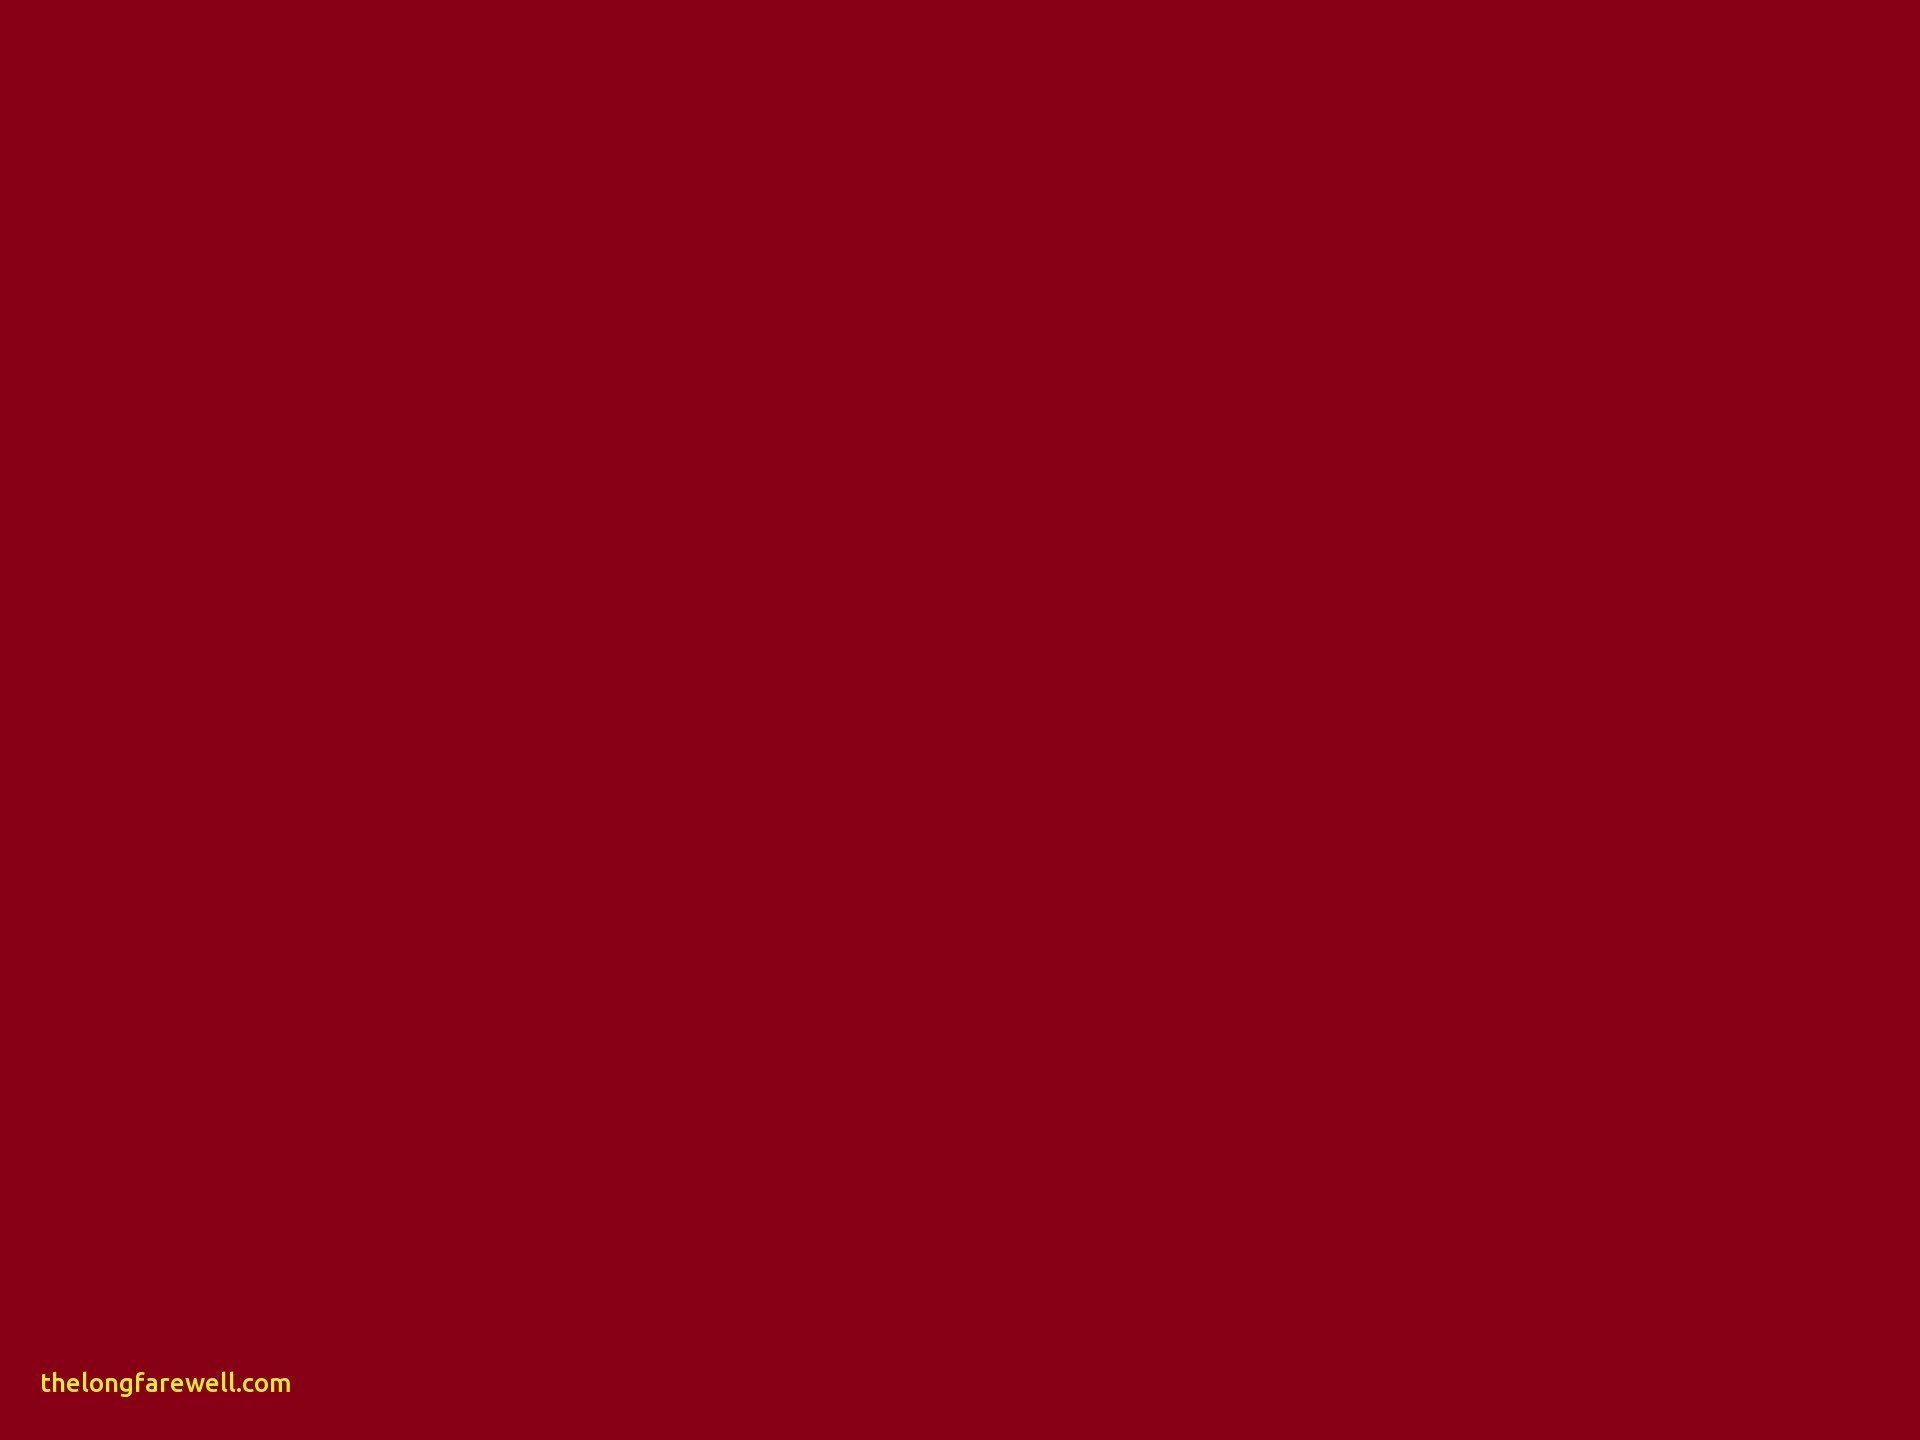 High Quality Solid Red Wallpaper